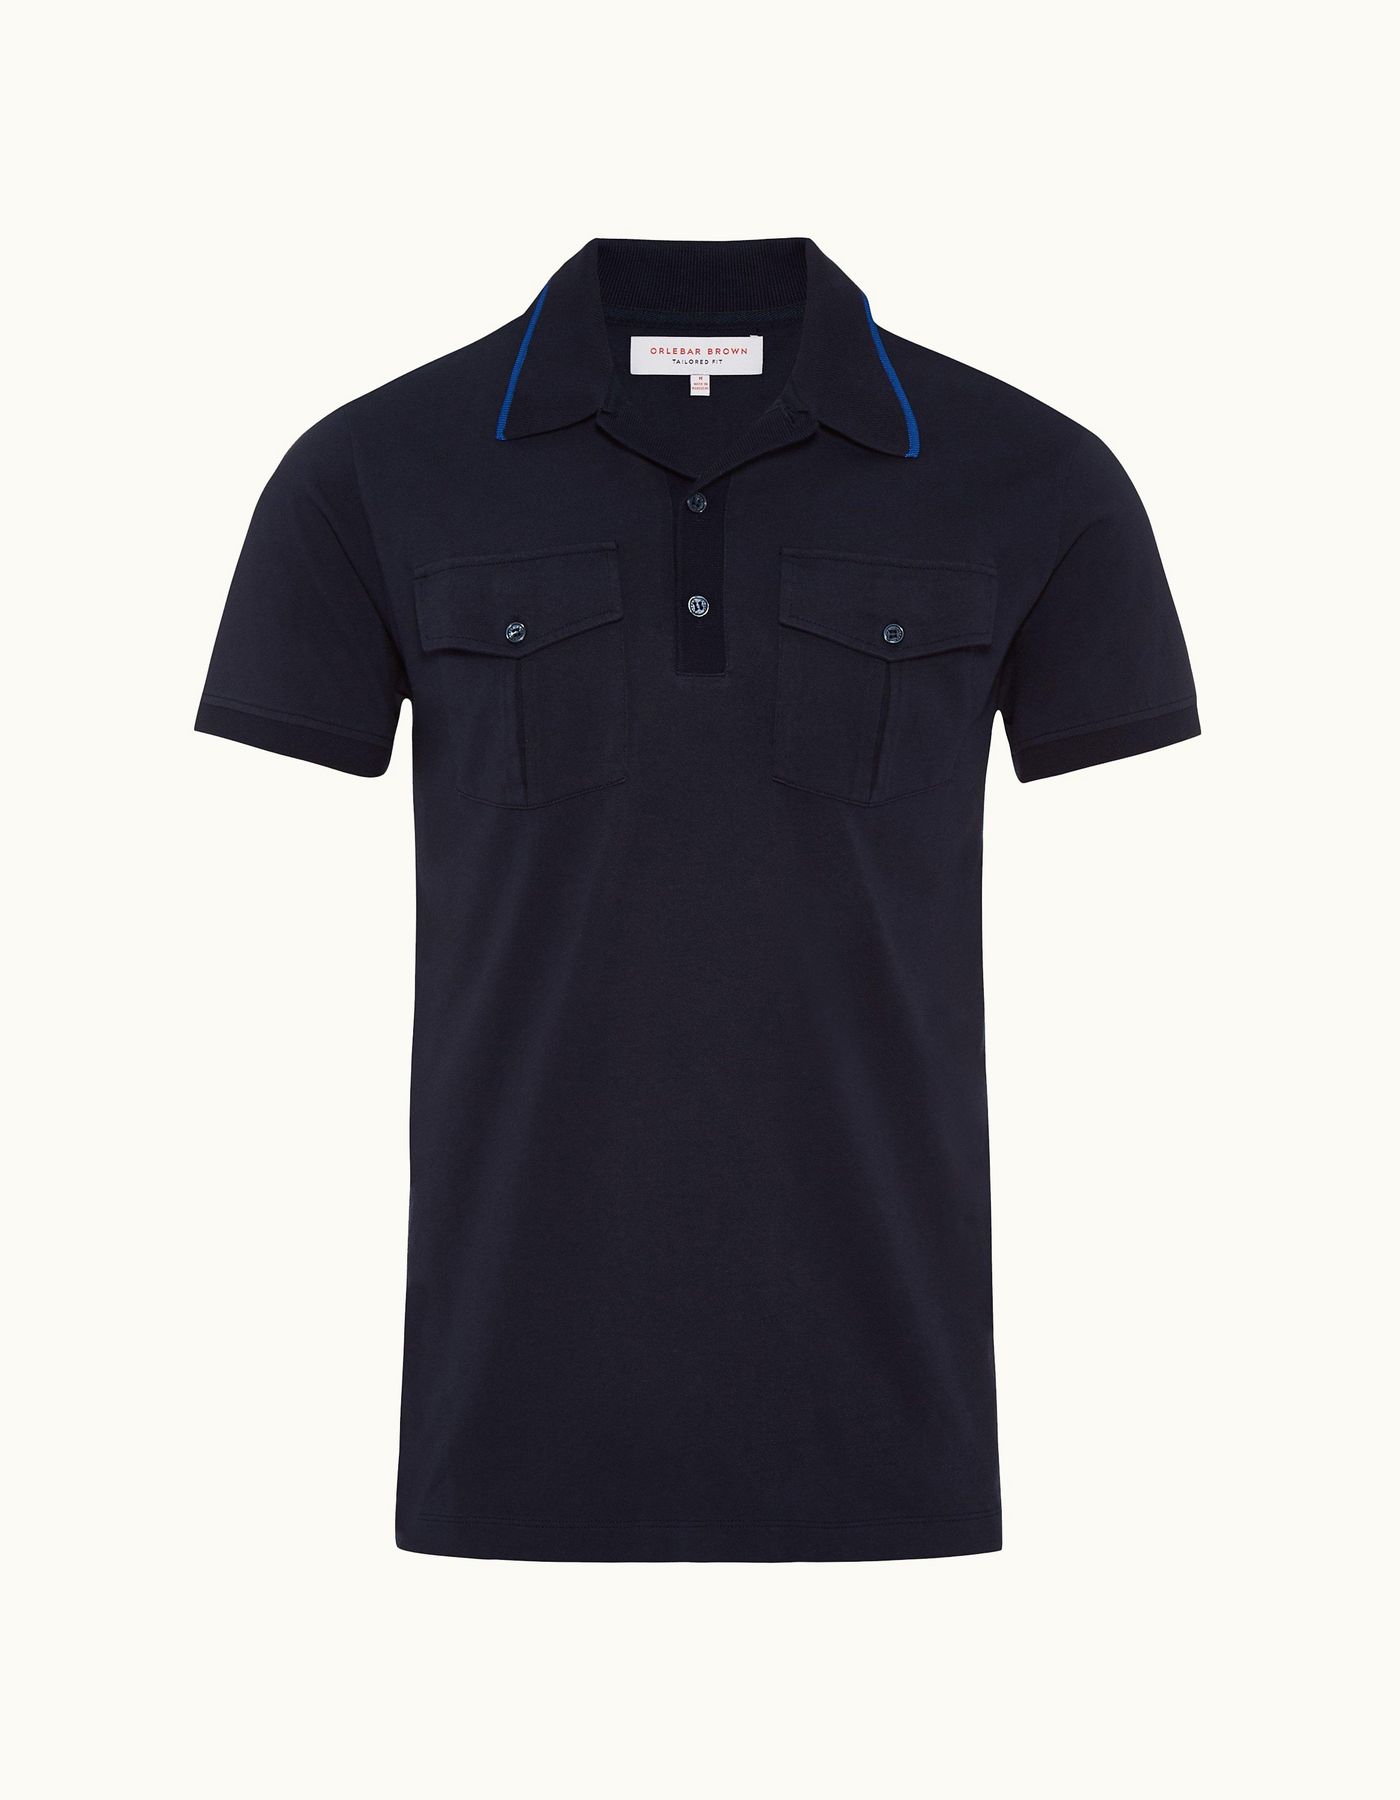 Retton - Mens Navy Tailored-Fit Polo Shirt